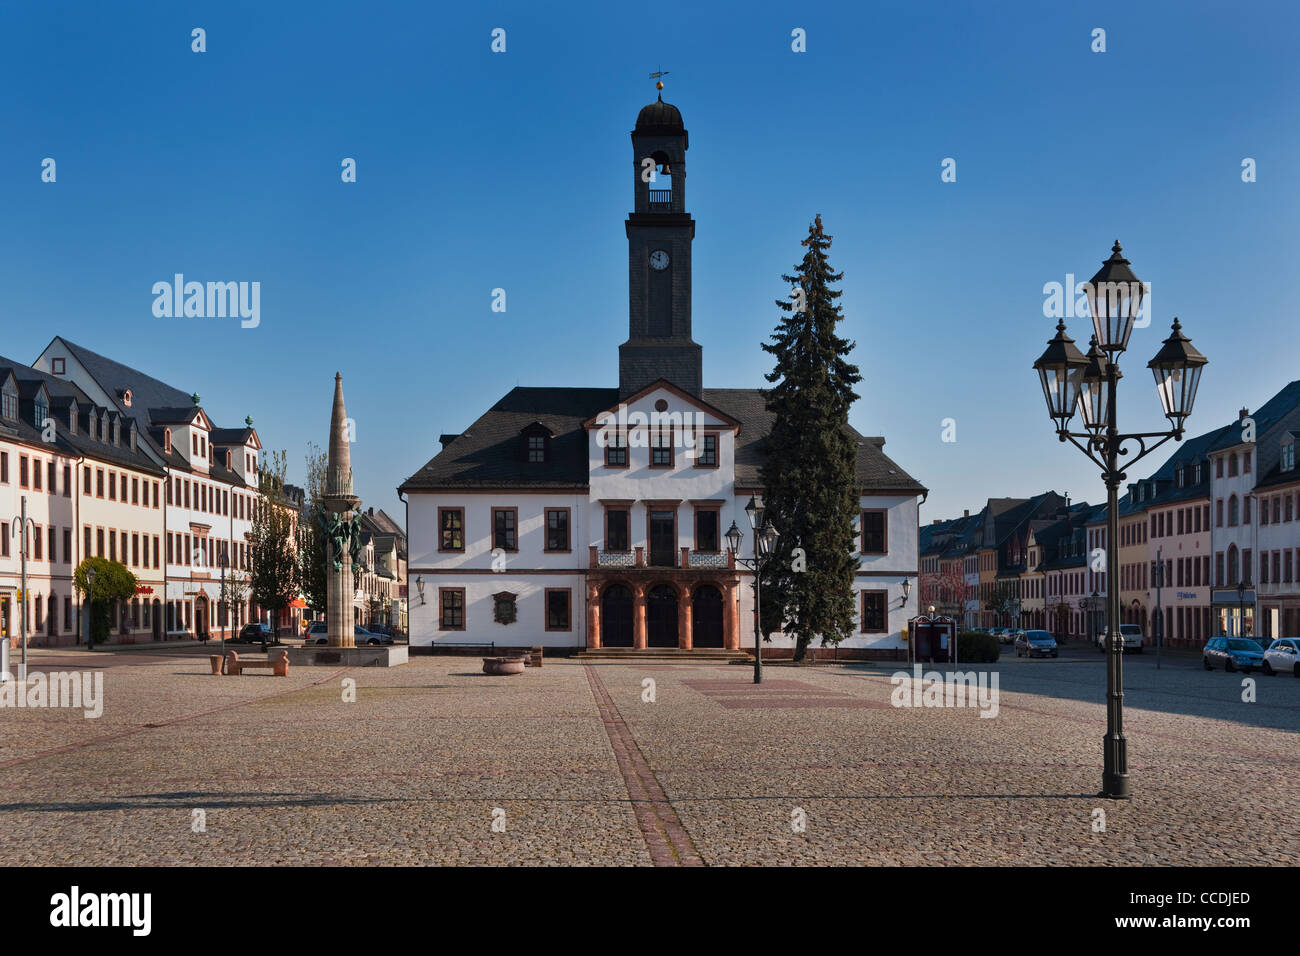 View from the marketplace to the city hall of Rochlitz build in 1828, Rochlitz, Saxony Germany Europe Stock Photo